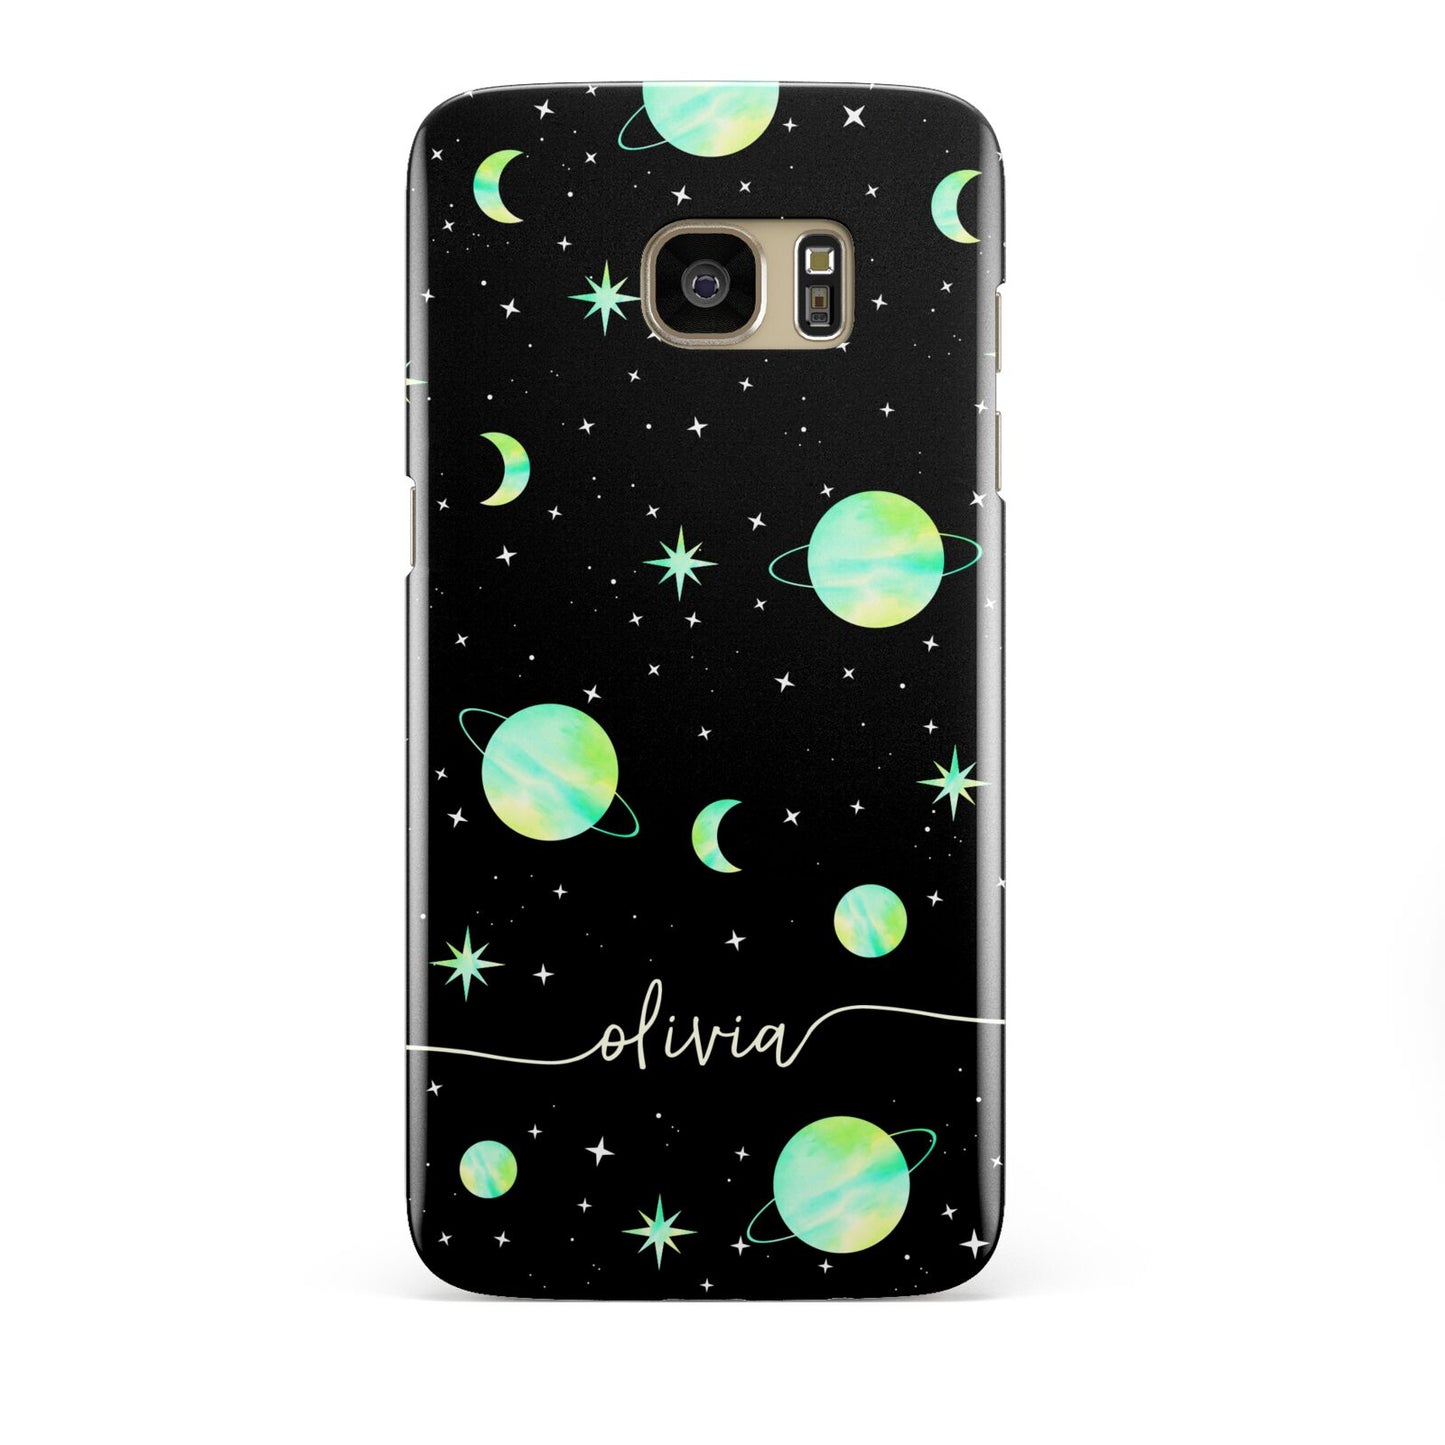 Green Galaxy Personalised Name Samsung Galaxy S7 Edge Case